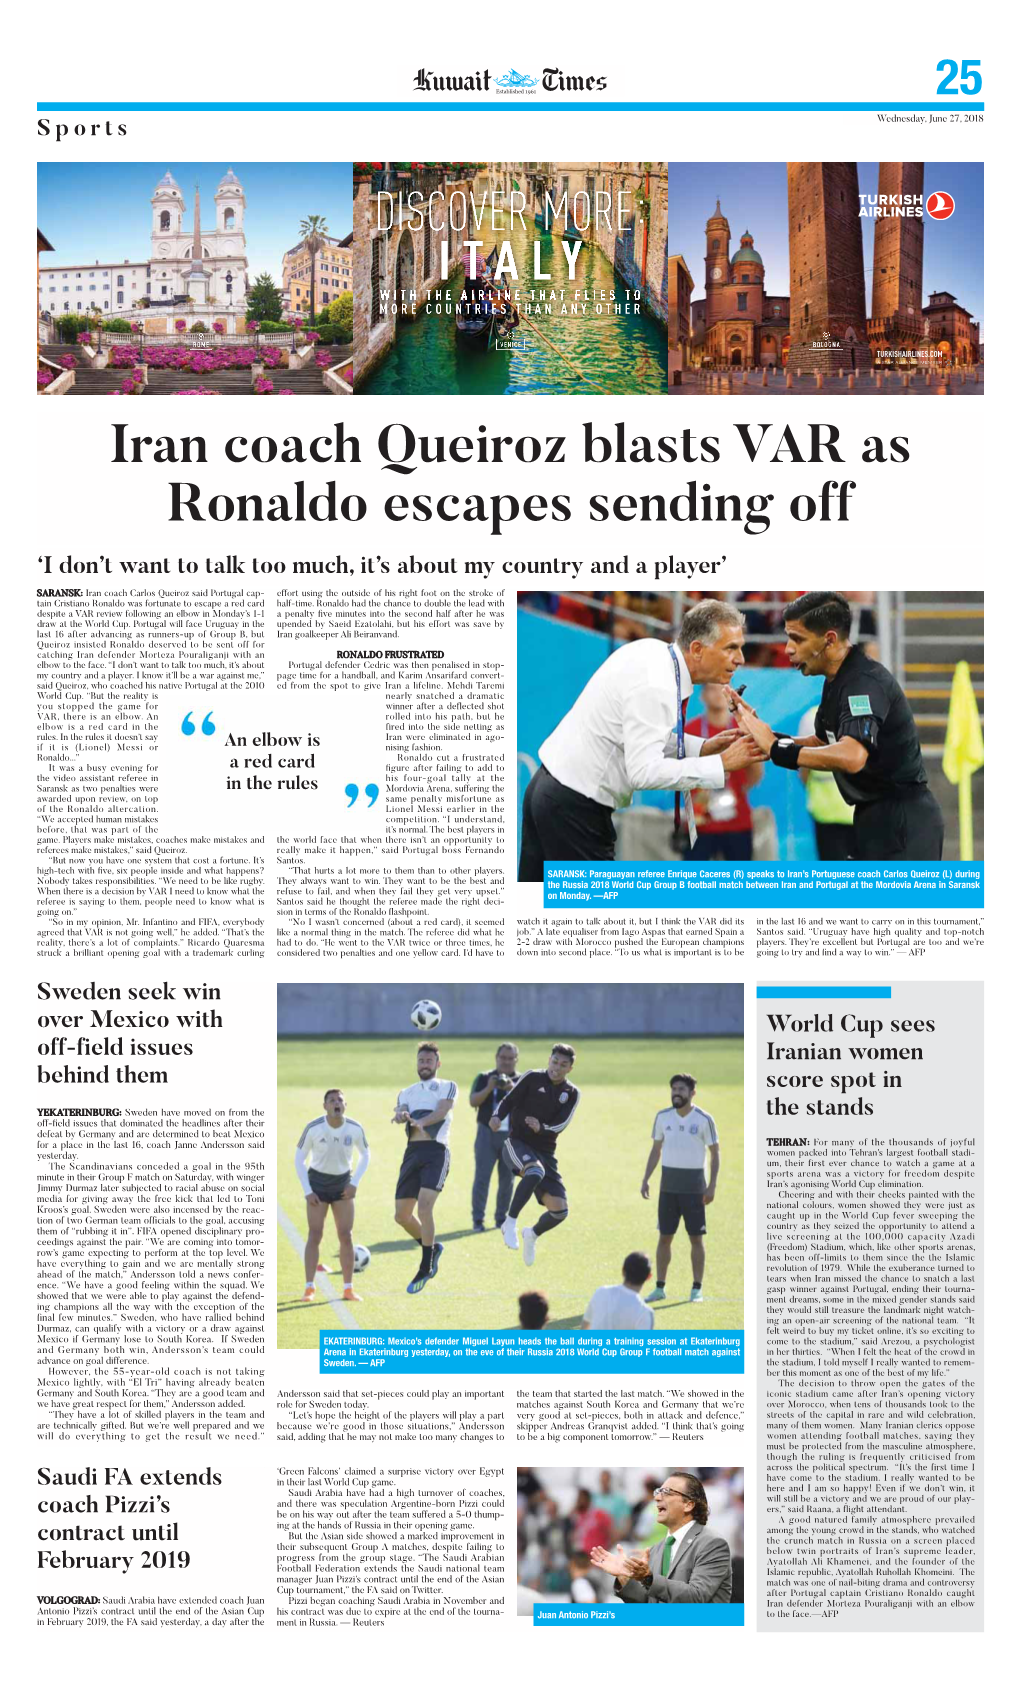 Iran Coach Queiroz Blasts VAR As Ronaldo Escapes Sending Off ‘I Don’T Want to Talk Too Much, It’S About My Country and a Player’